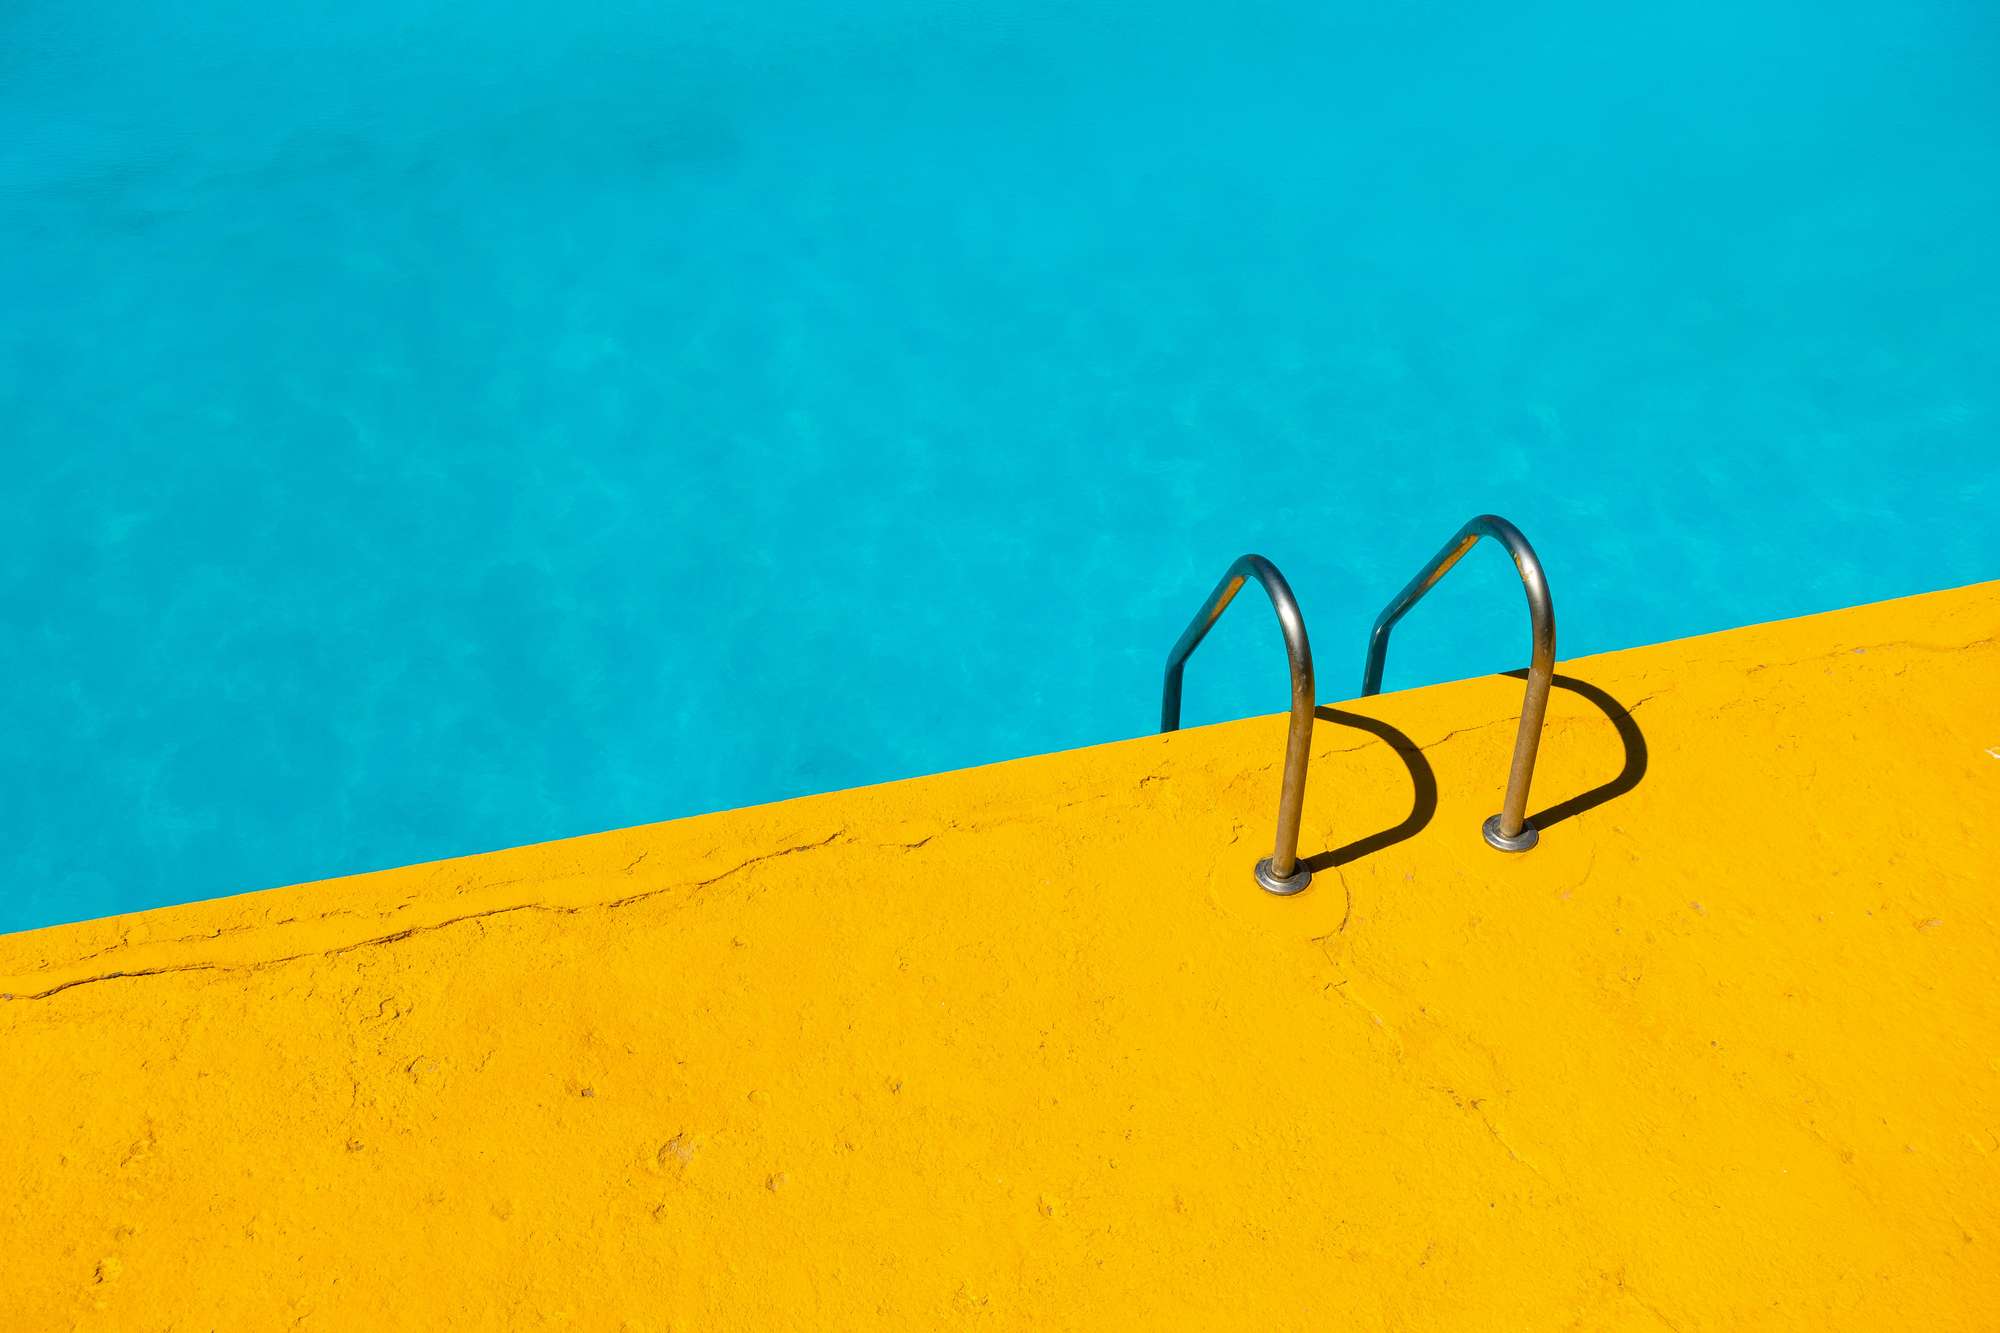 A swimming pool's edge with a stainless steel ladder; the water is a nice turquoise and the concrete around it is bright yellow